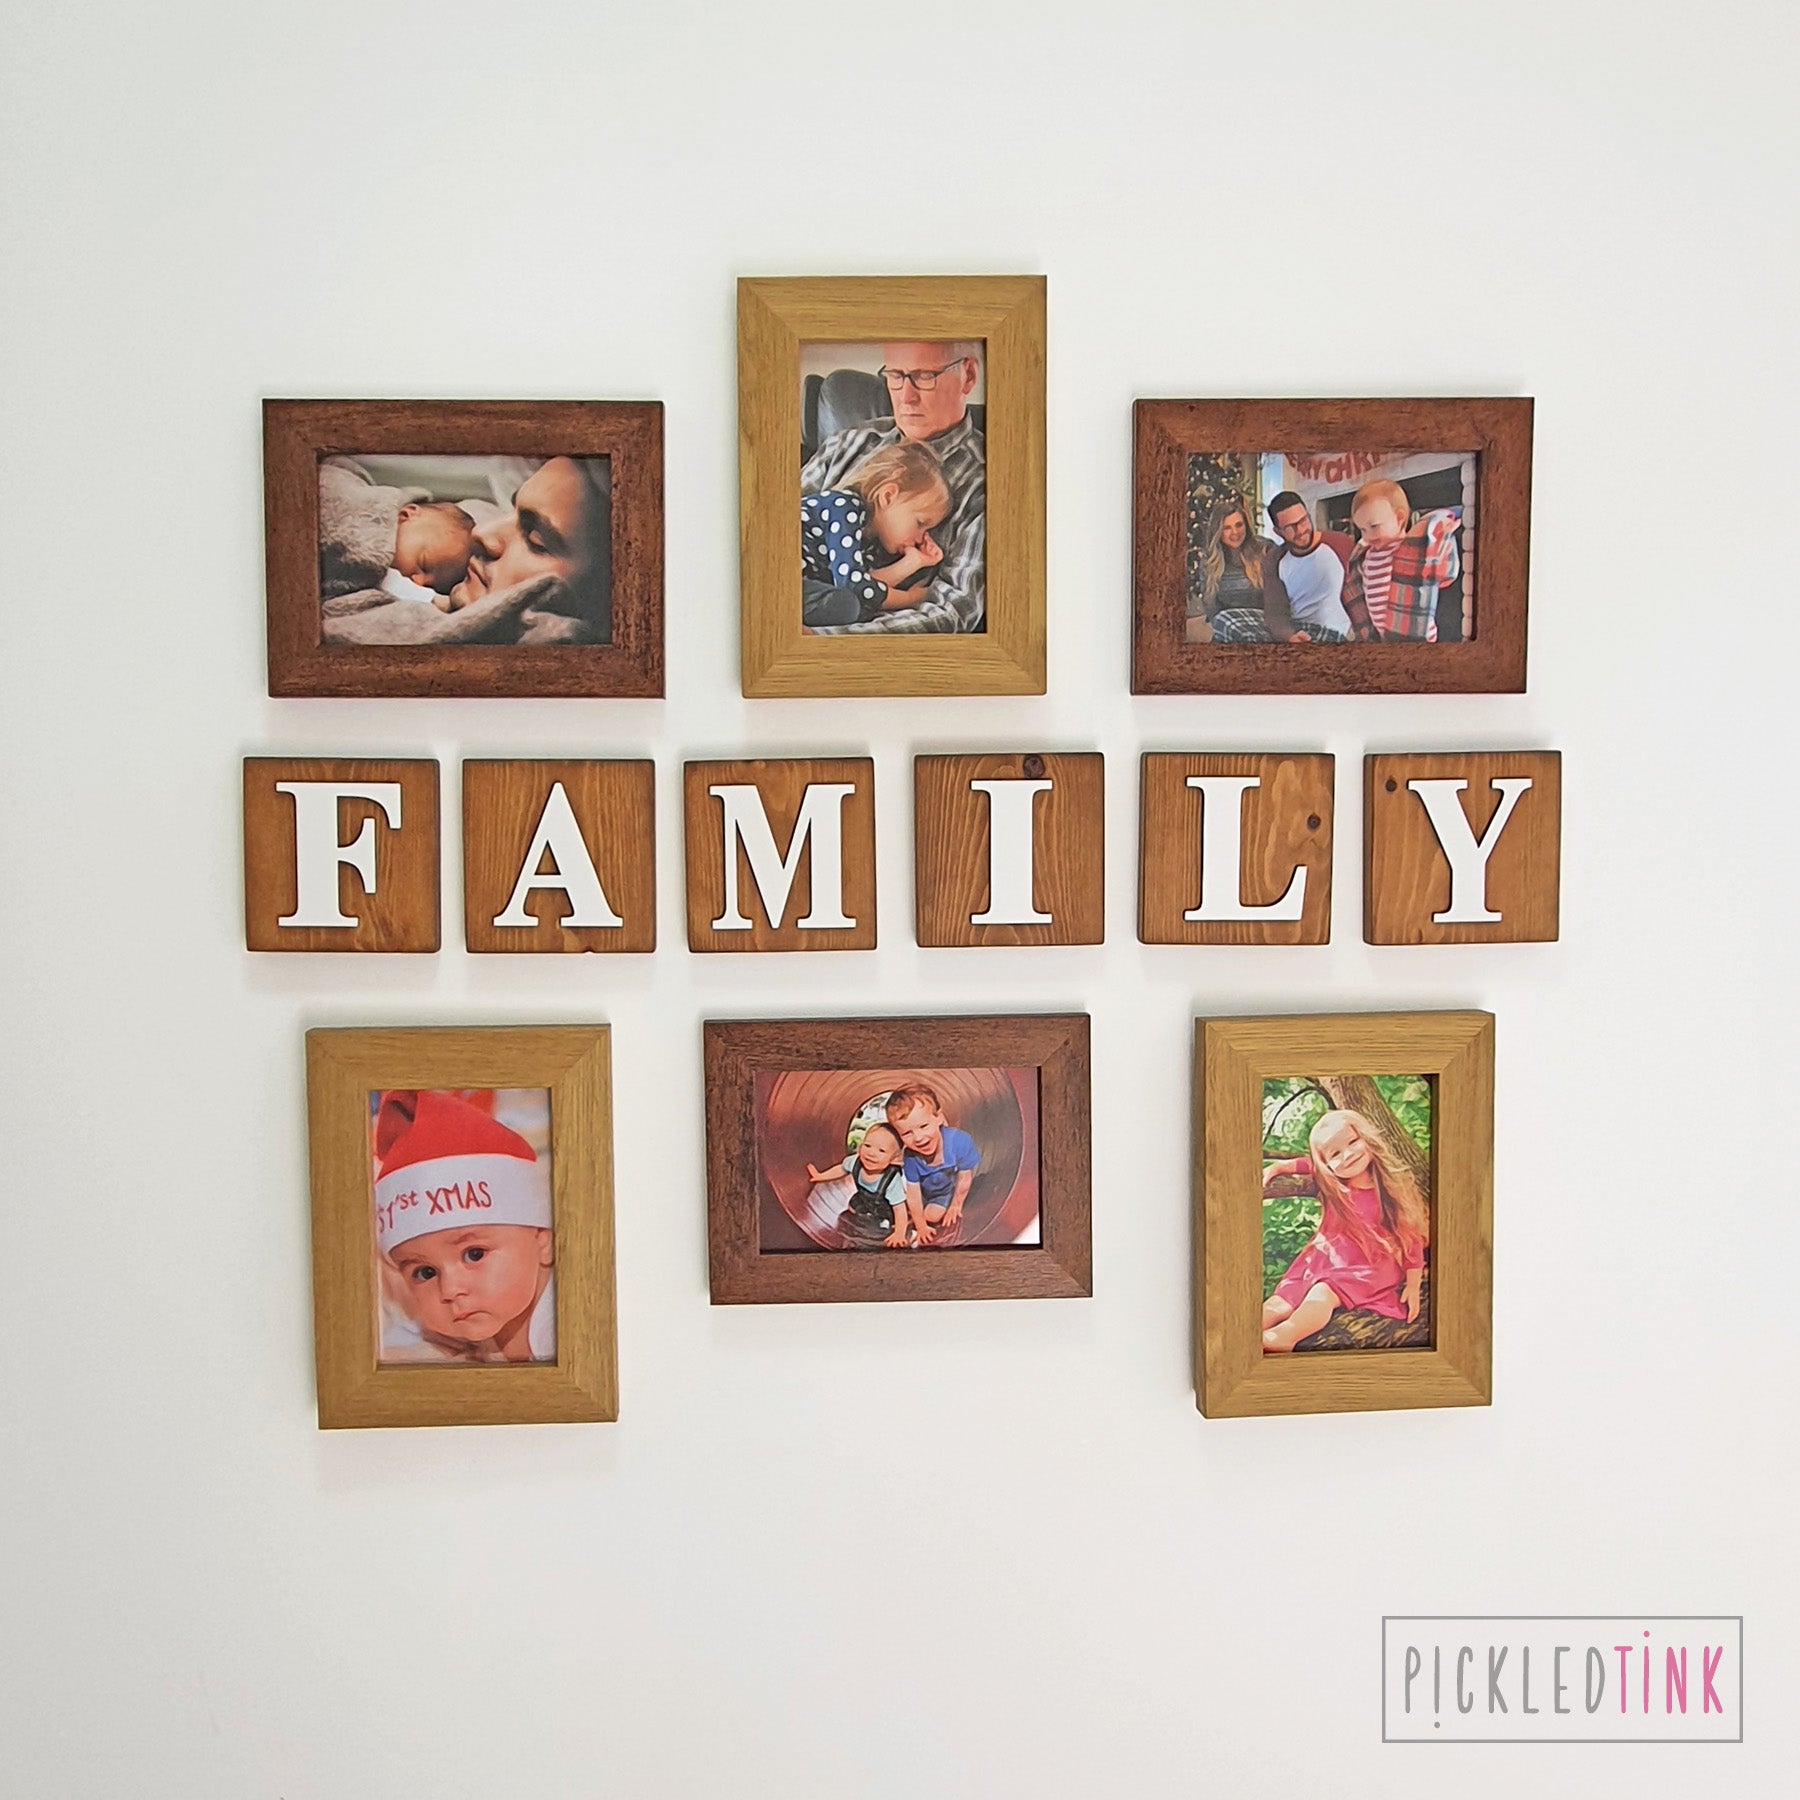 Wooden Letter Wall Tiles